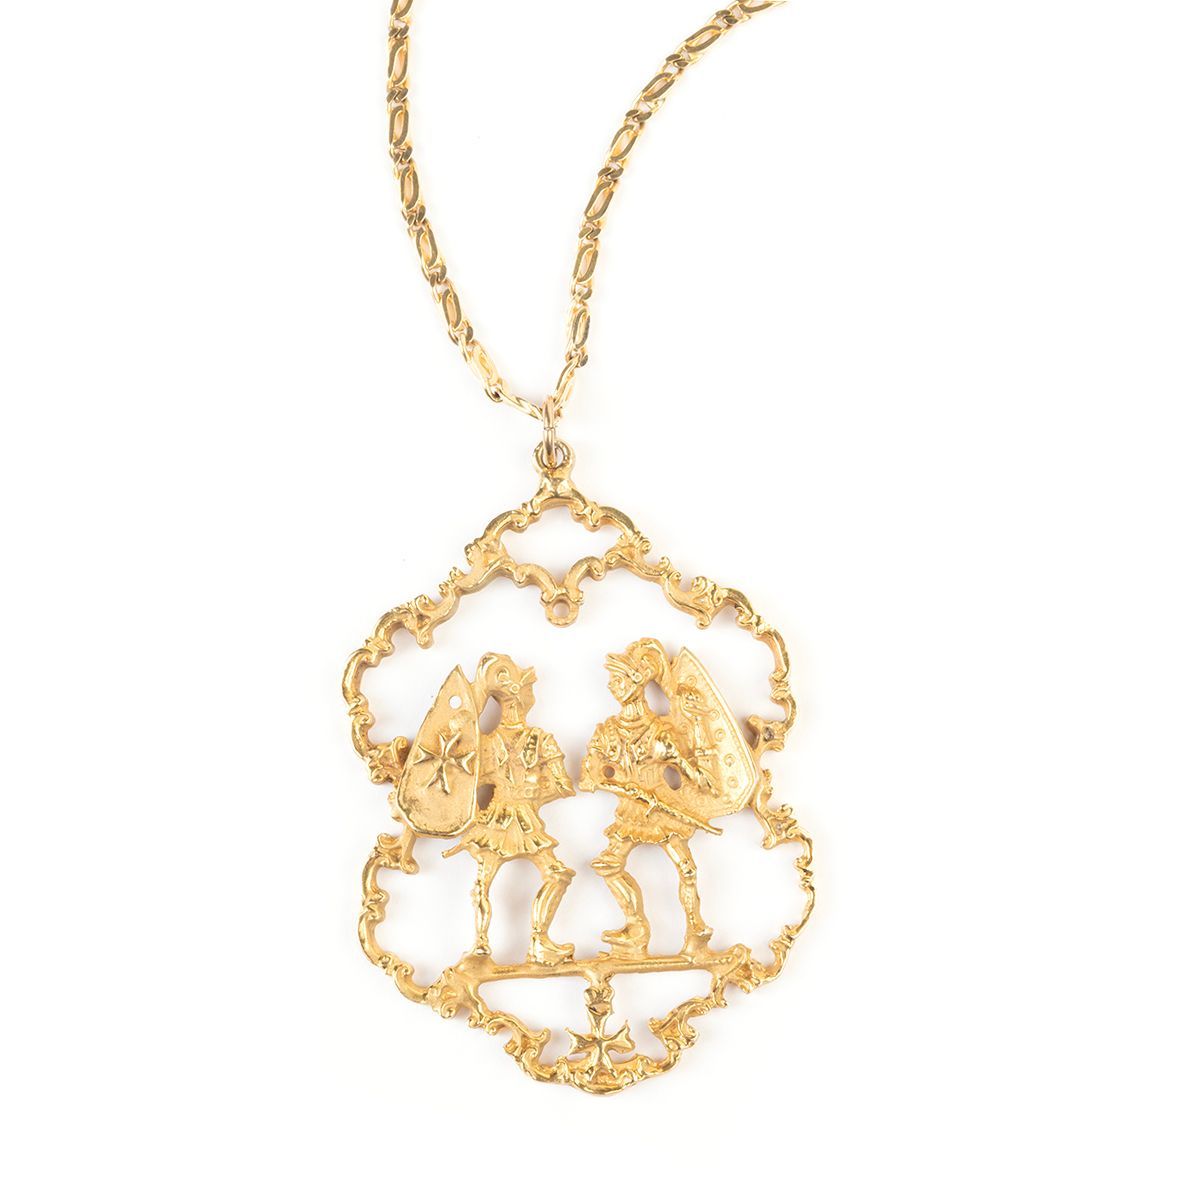 Read more about this necklace in our blog via the link-in-bio!

May Gallery Auction
Friday, May 17th | 10 a.m.
Eric De Kolb 14k Yellow Gold Necklace.
Estimate: $1,500 / $2,500
#michaansauctions #auctions #michaans #galleryauction #jewelry #necklace #goldnecklace #ericdekolb